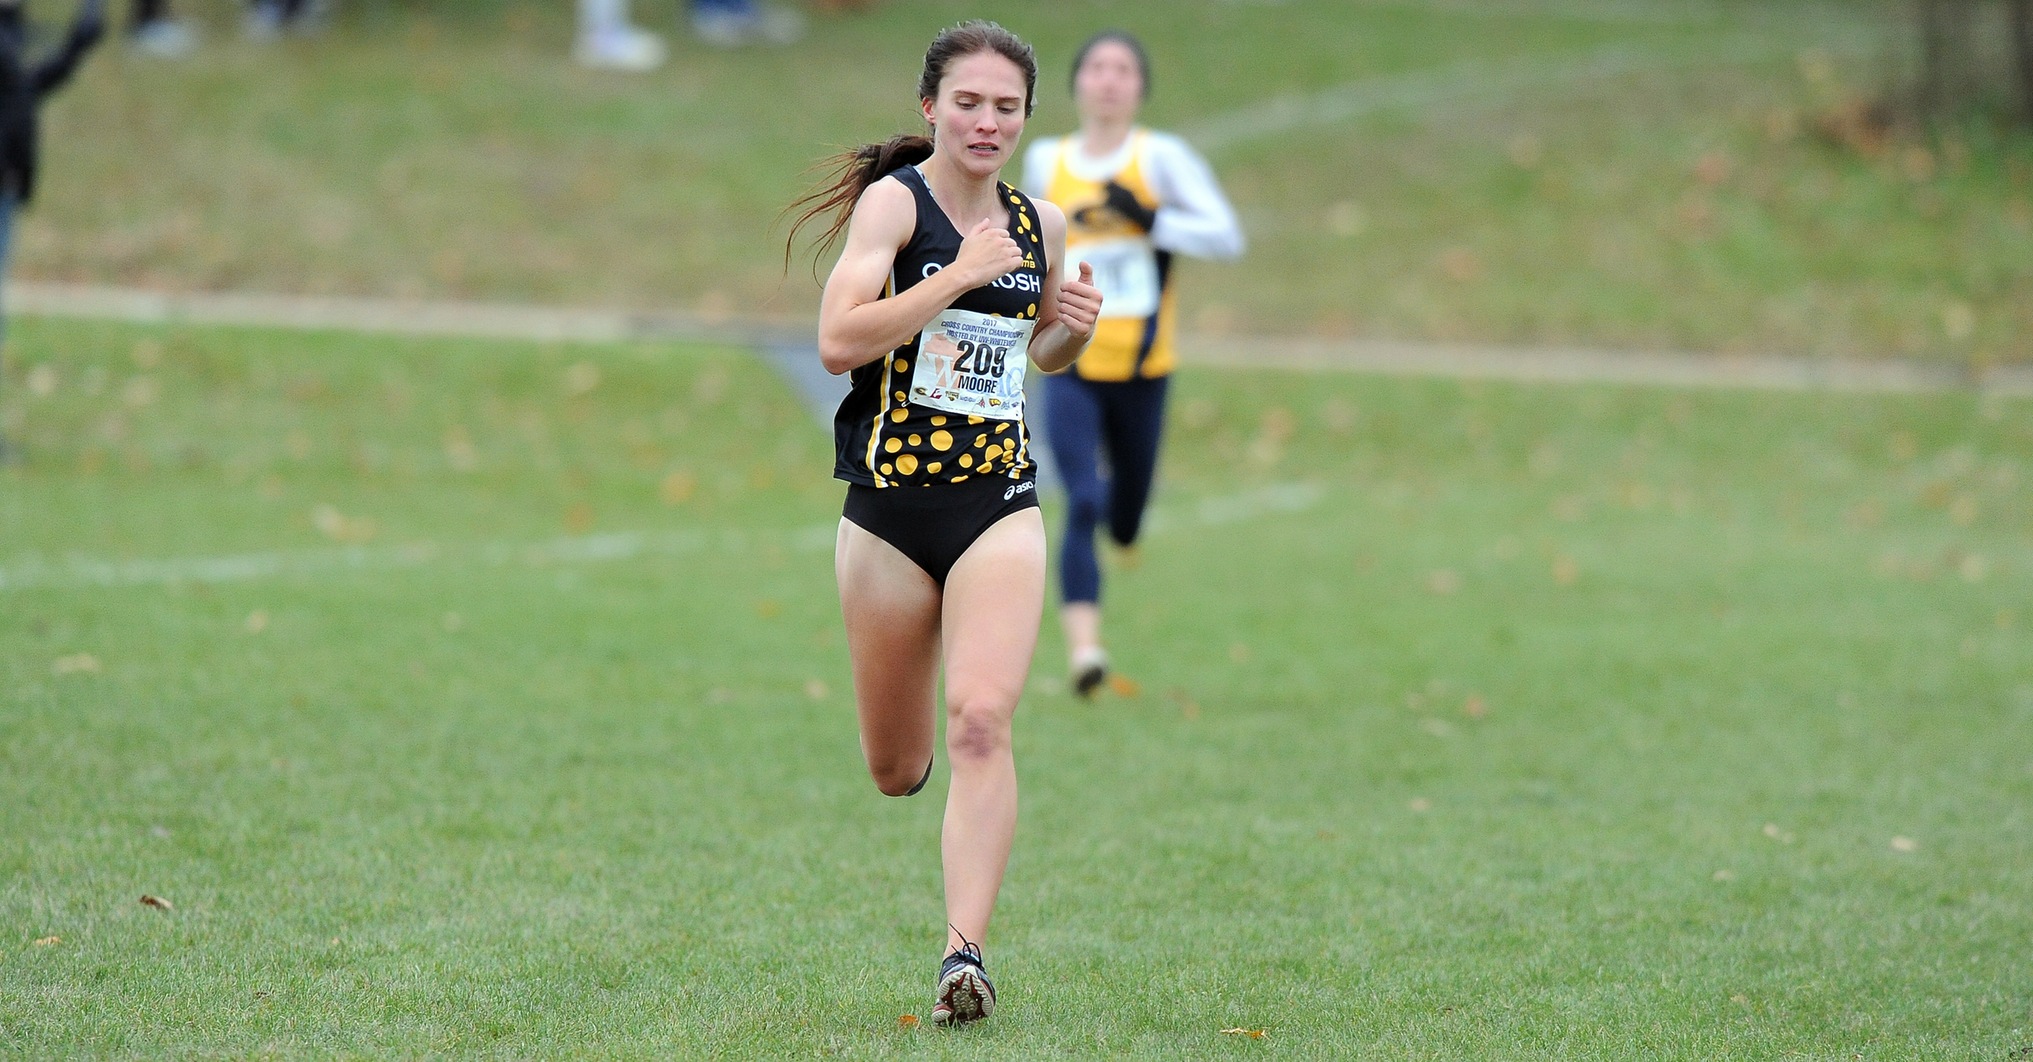 Cheyenne Moore is the seventh Titan to win more than one WIAC Championship race.